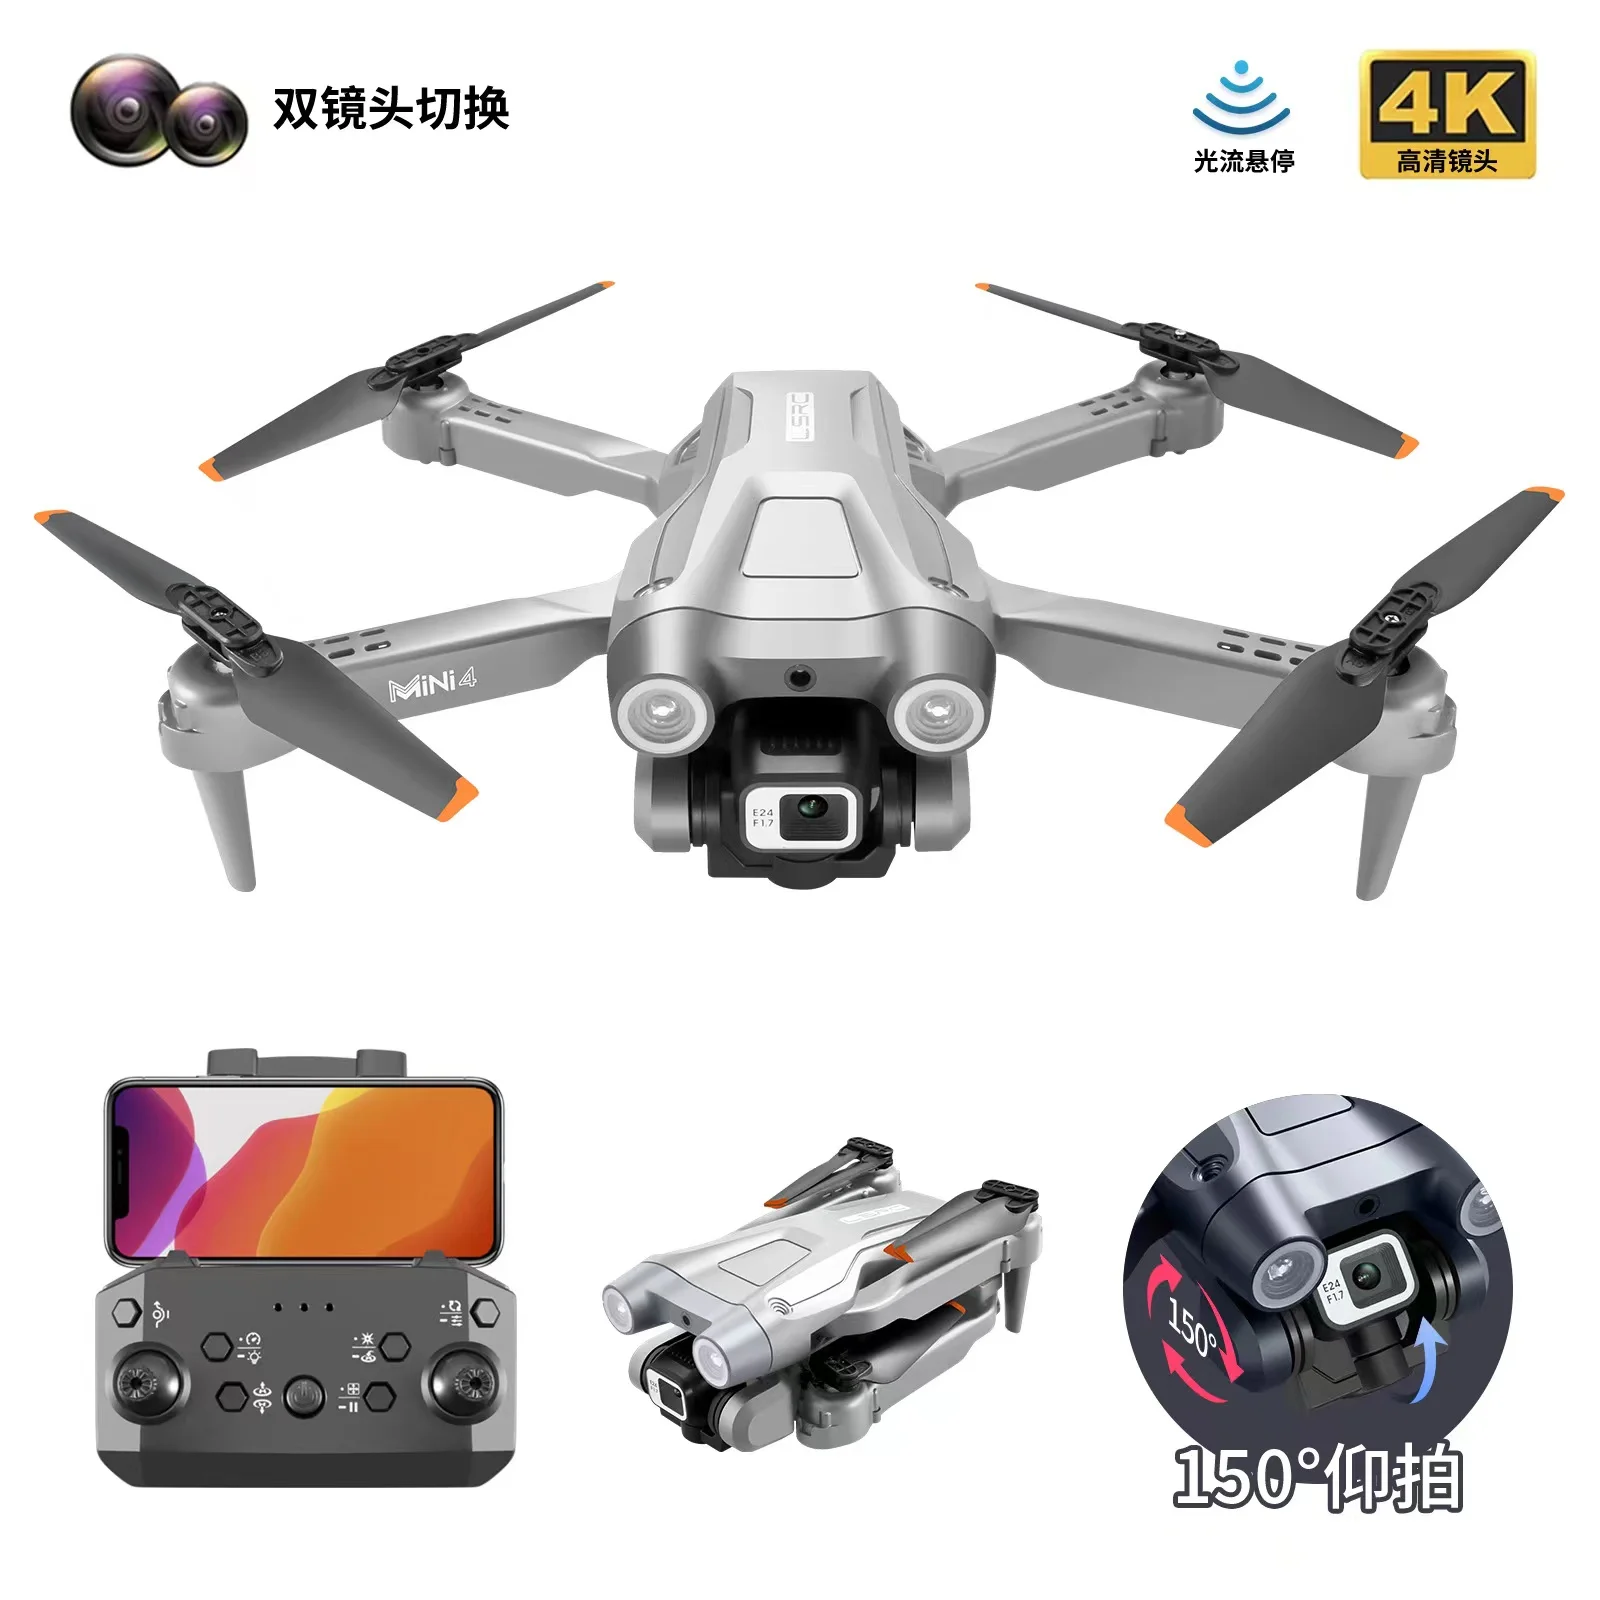 MINI 4 aerial UAV 4K overhead camera aircraft optical flow positioning four side obstacle avoidance remote control aircraft toy